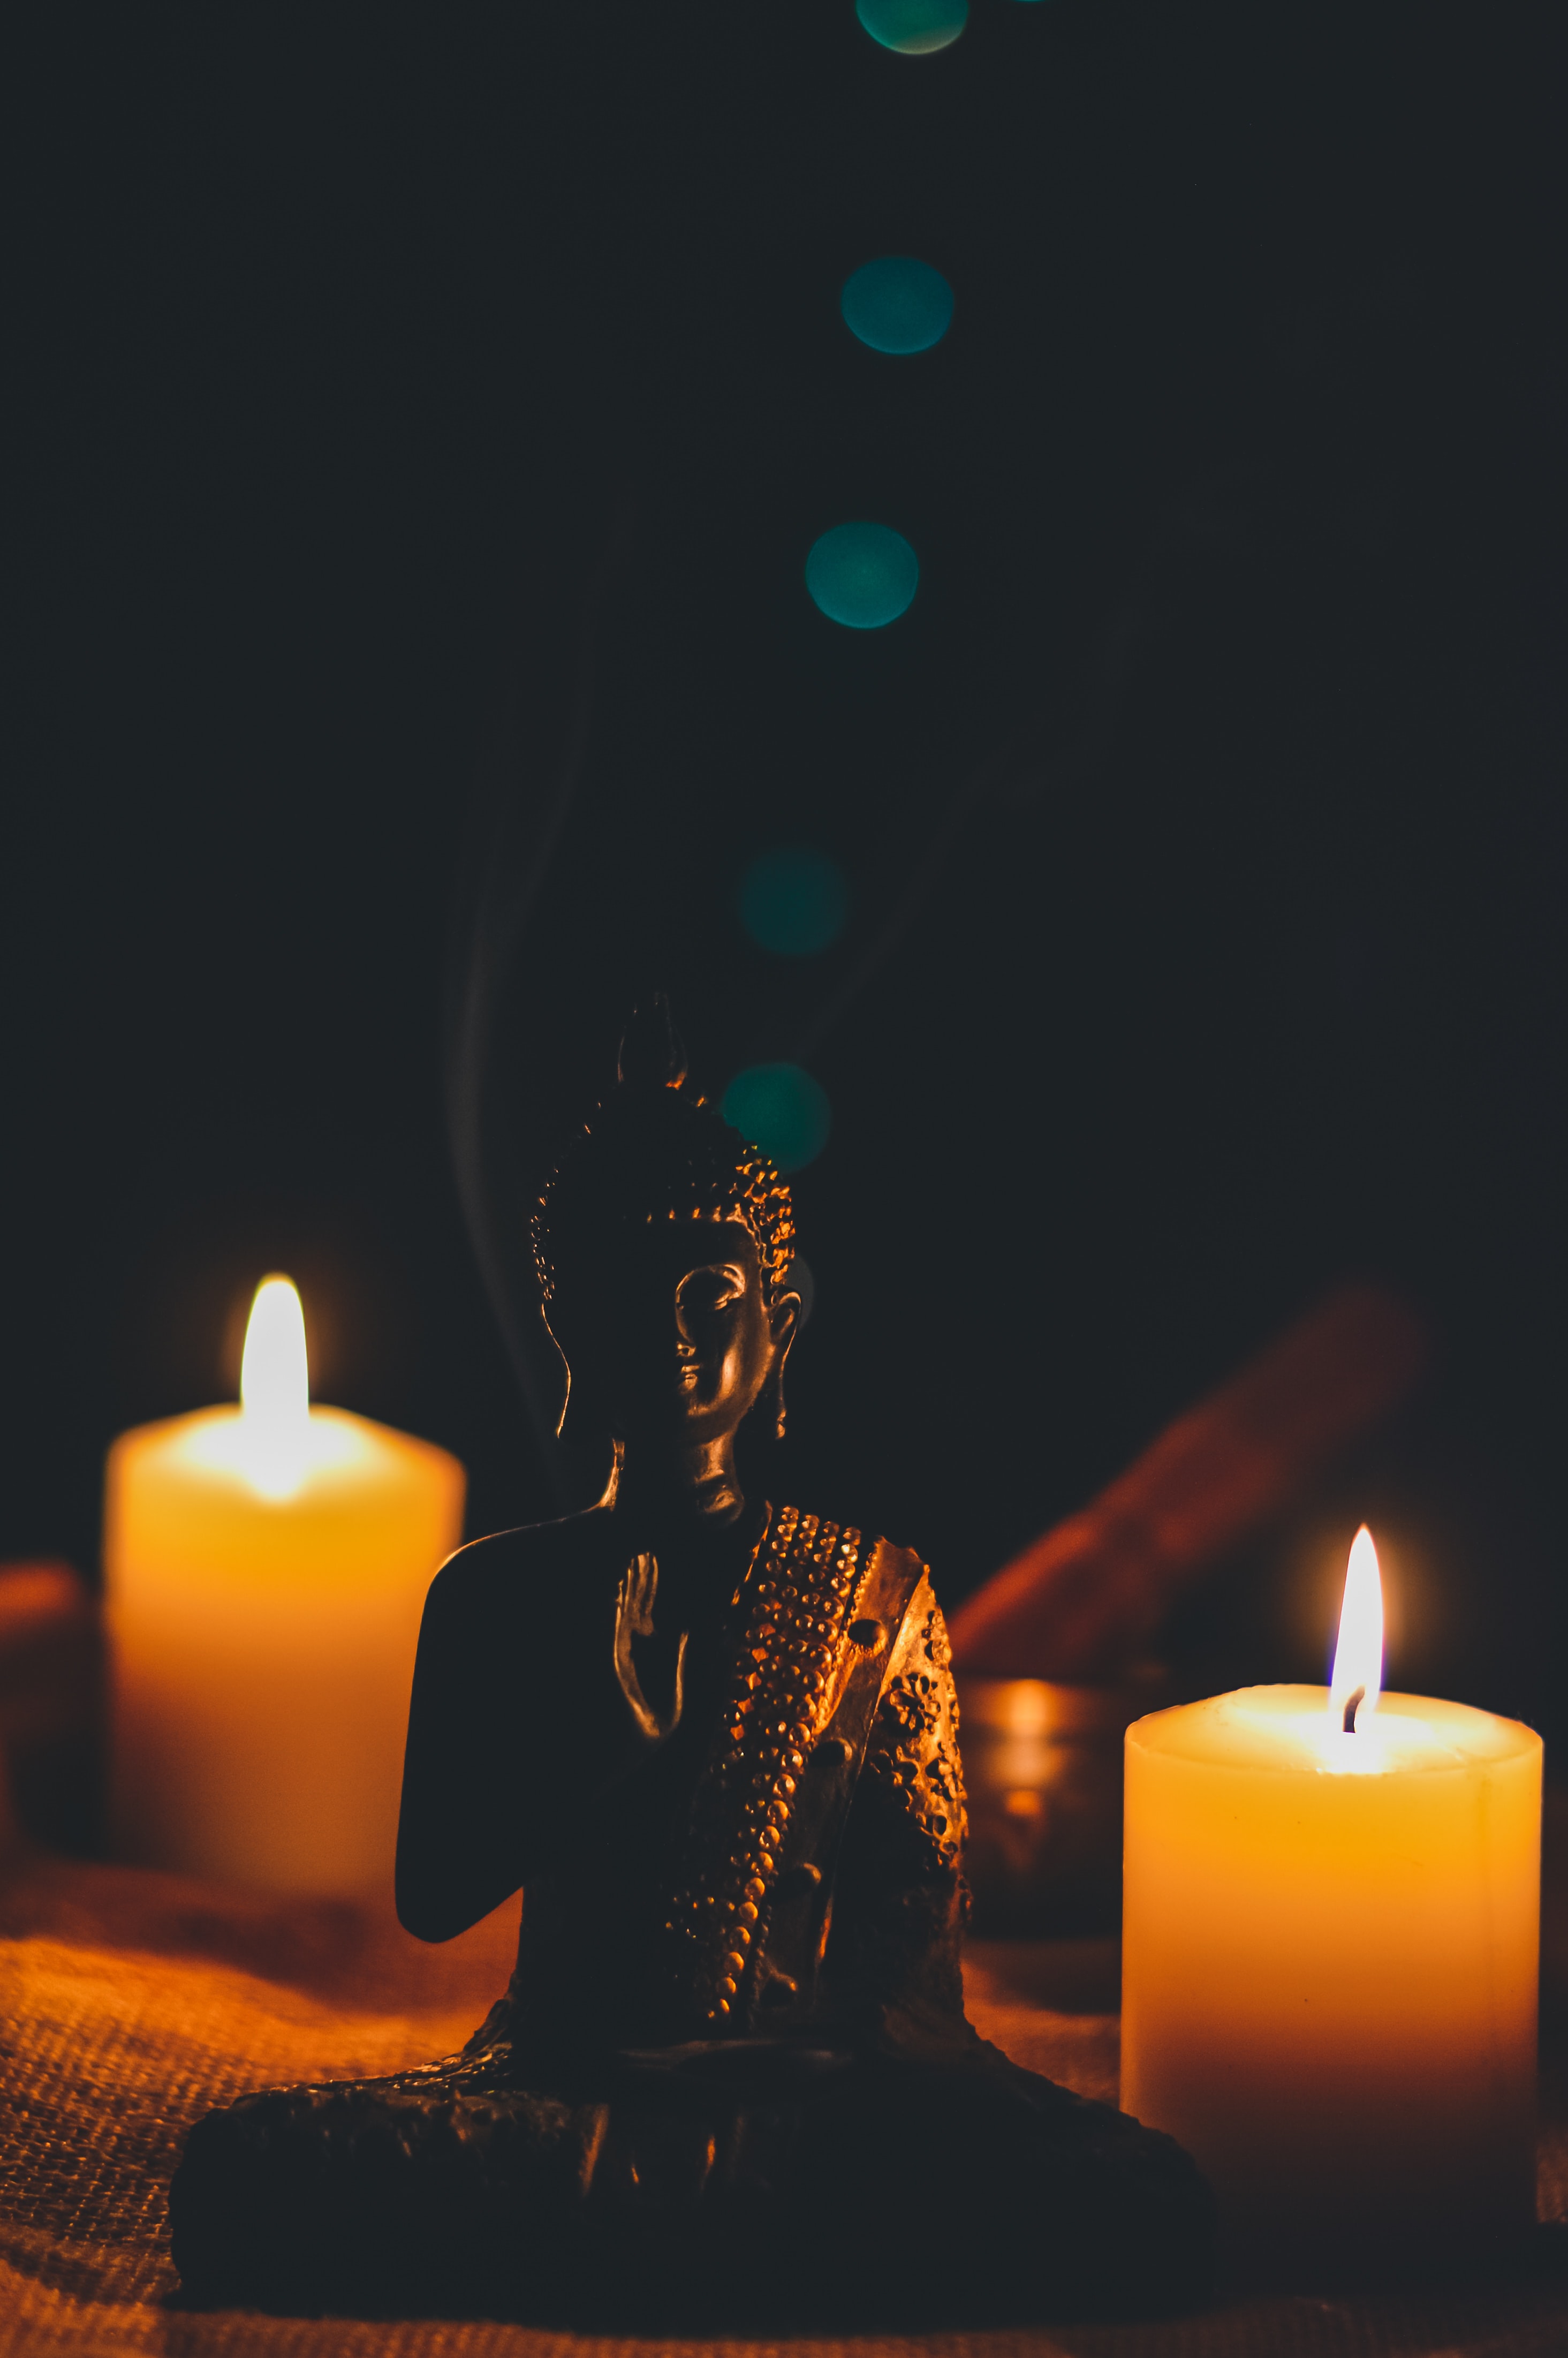 Buddha statue with two candles